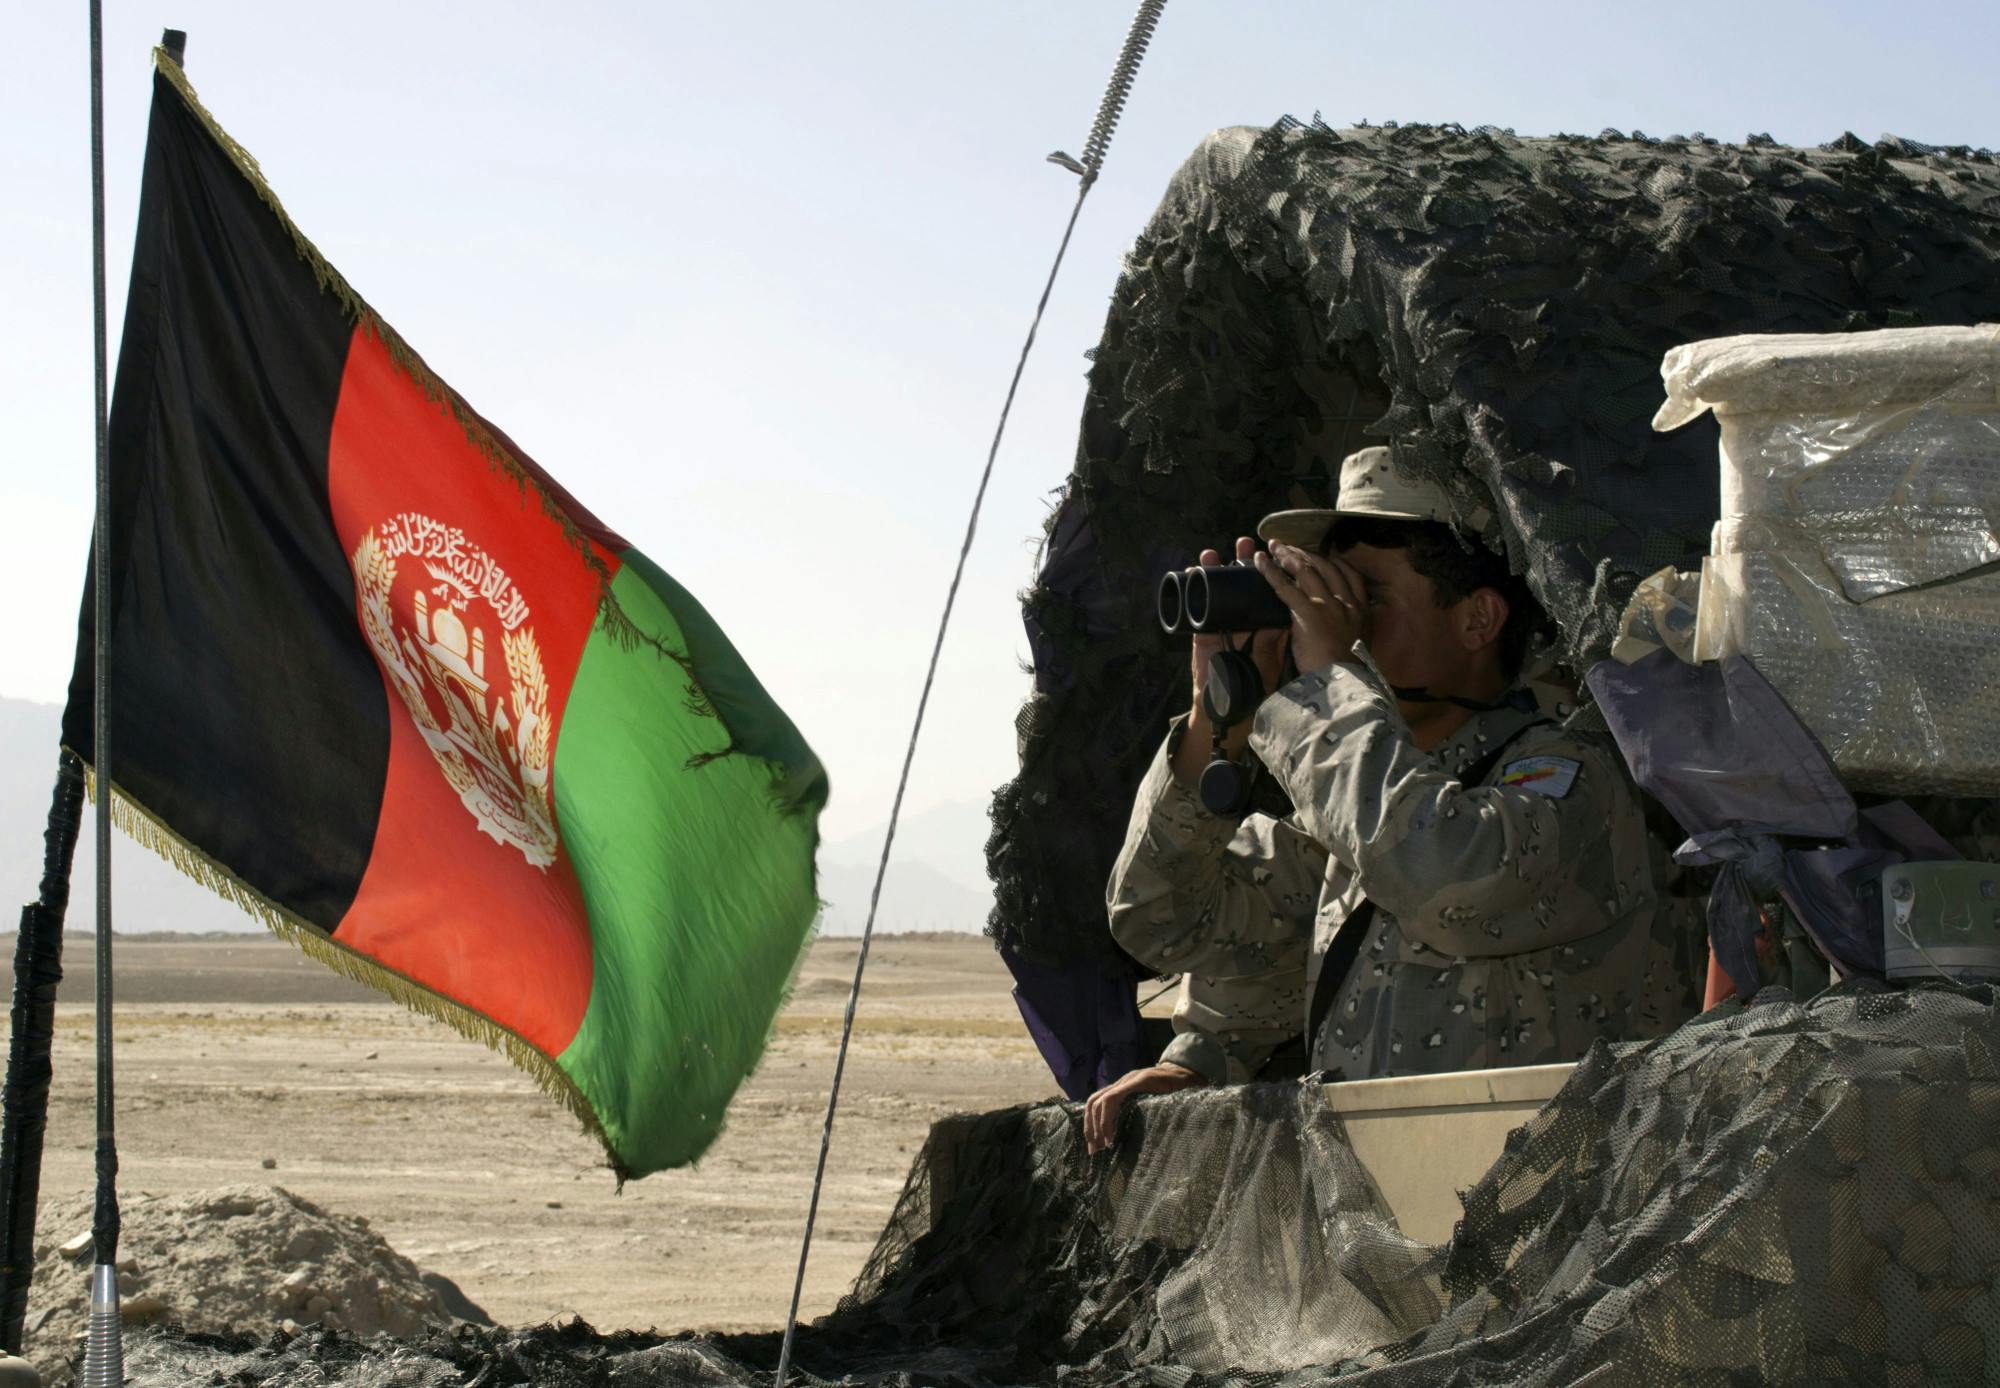 “We Have All Failed the Afghan People”: A Conversation on Afghanistan